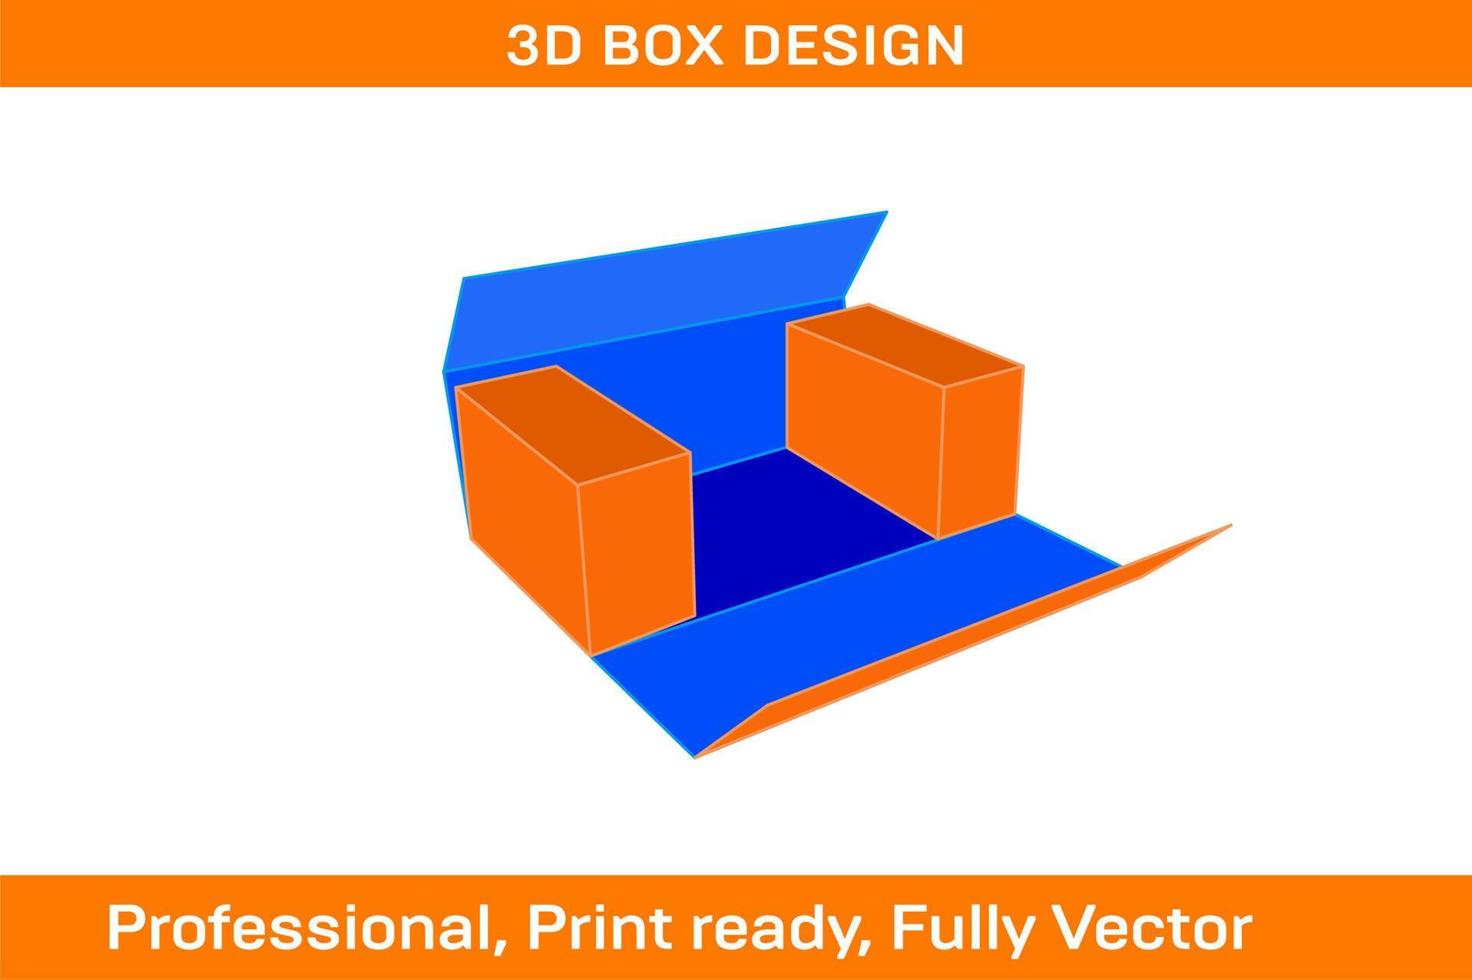 Cut-out FEFCO403 corrugated , cardboard carton box, 3D render with dieline template vector